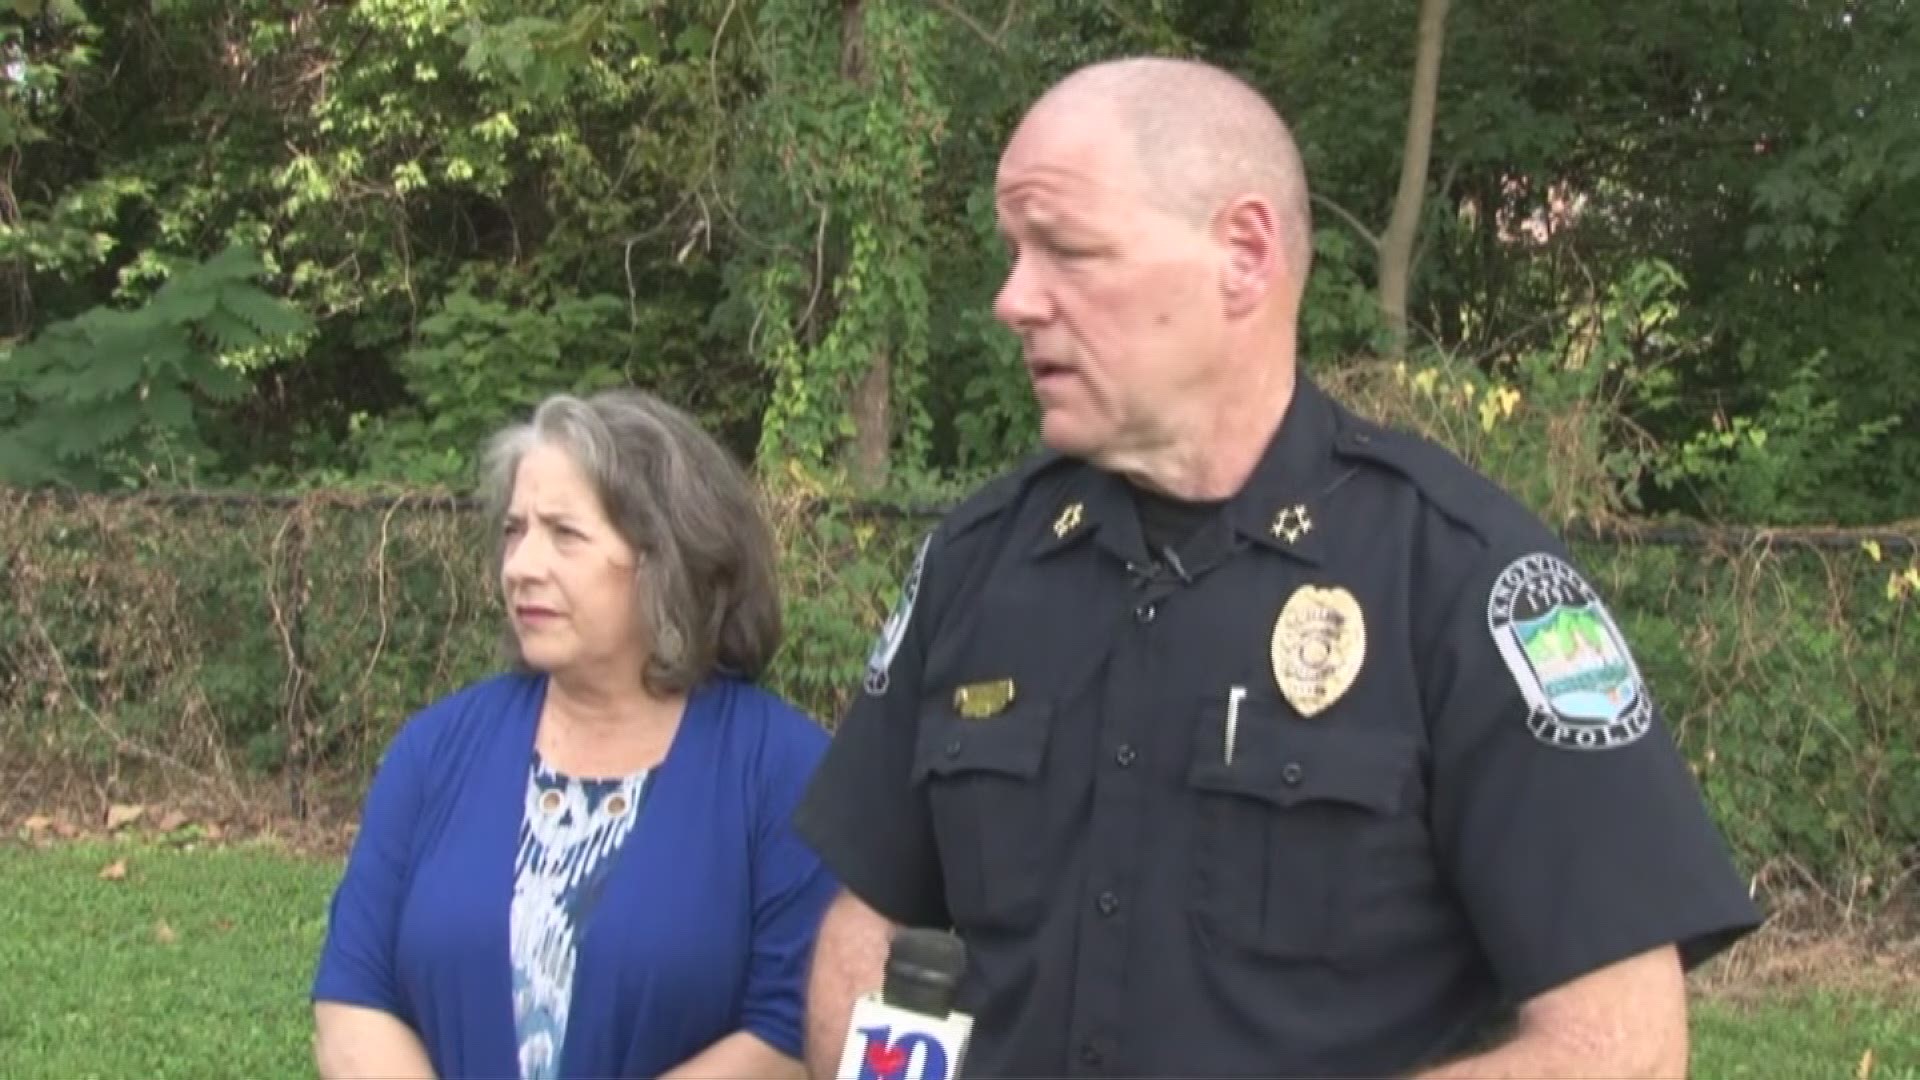 Knoxville city leaders talk about demonstrators near Fort Sanders monument.